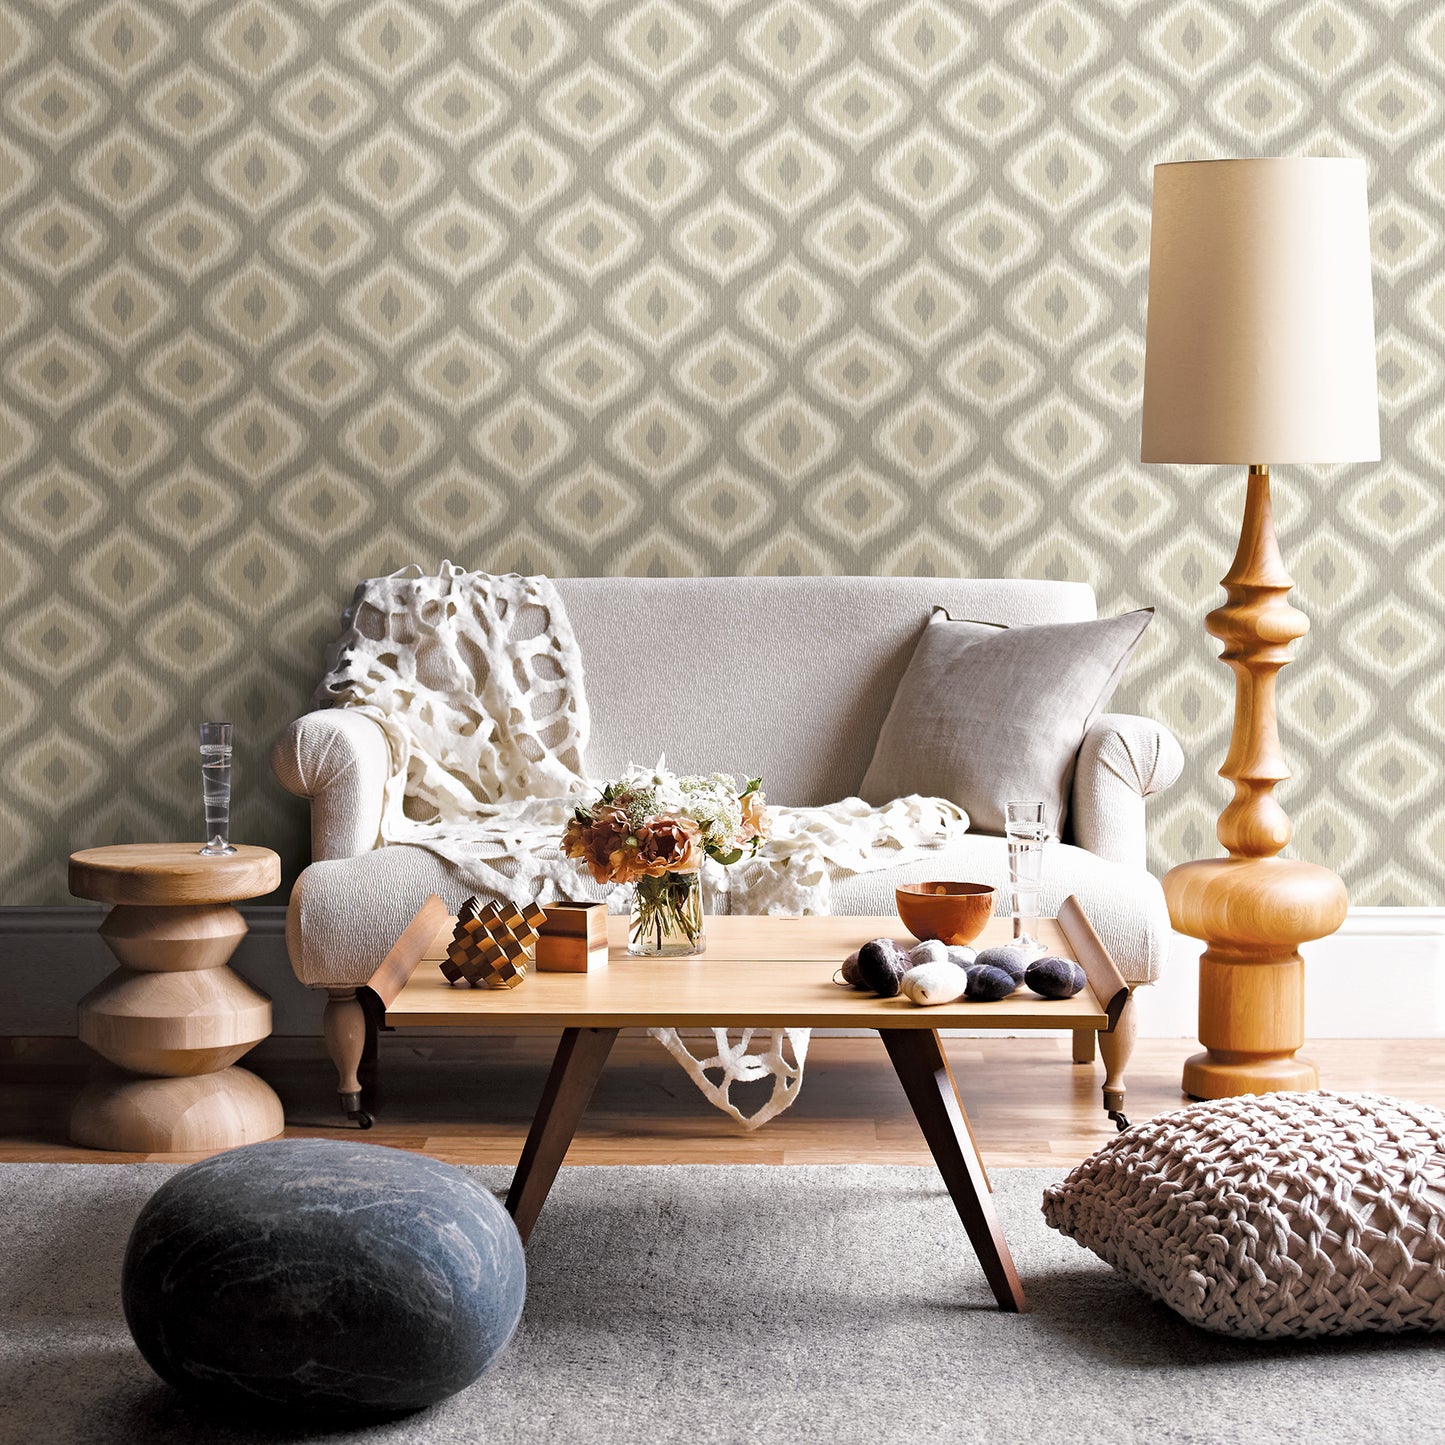 Looking for 2697-78015 Abra Taupe Ogee A-Street Prints Wallpaper